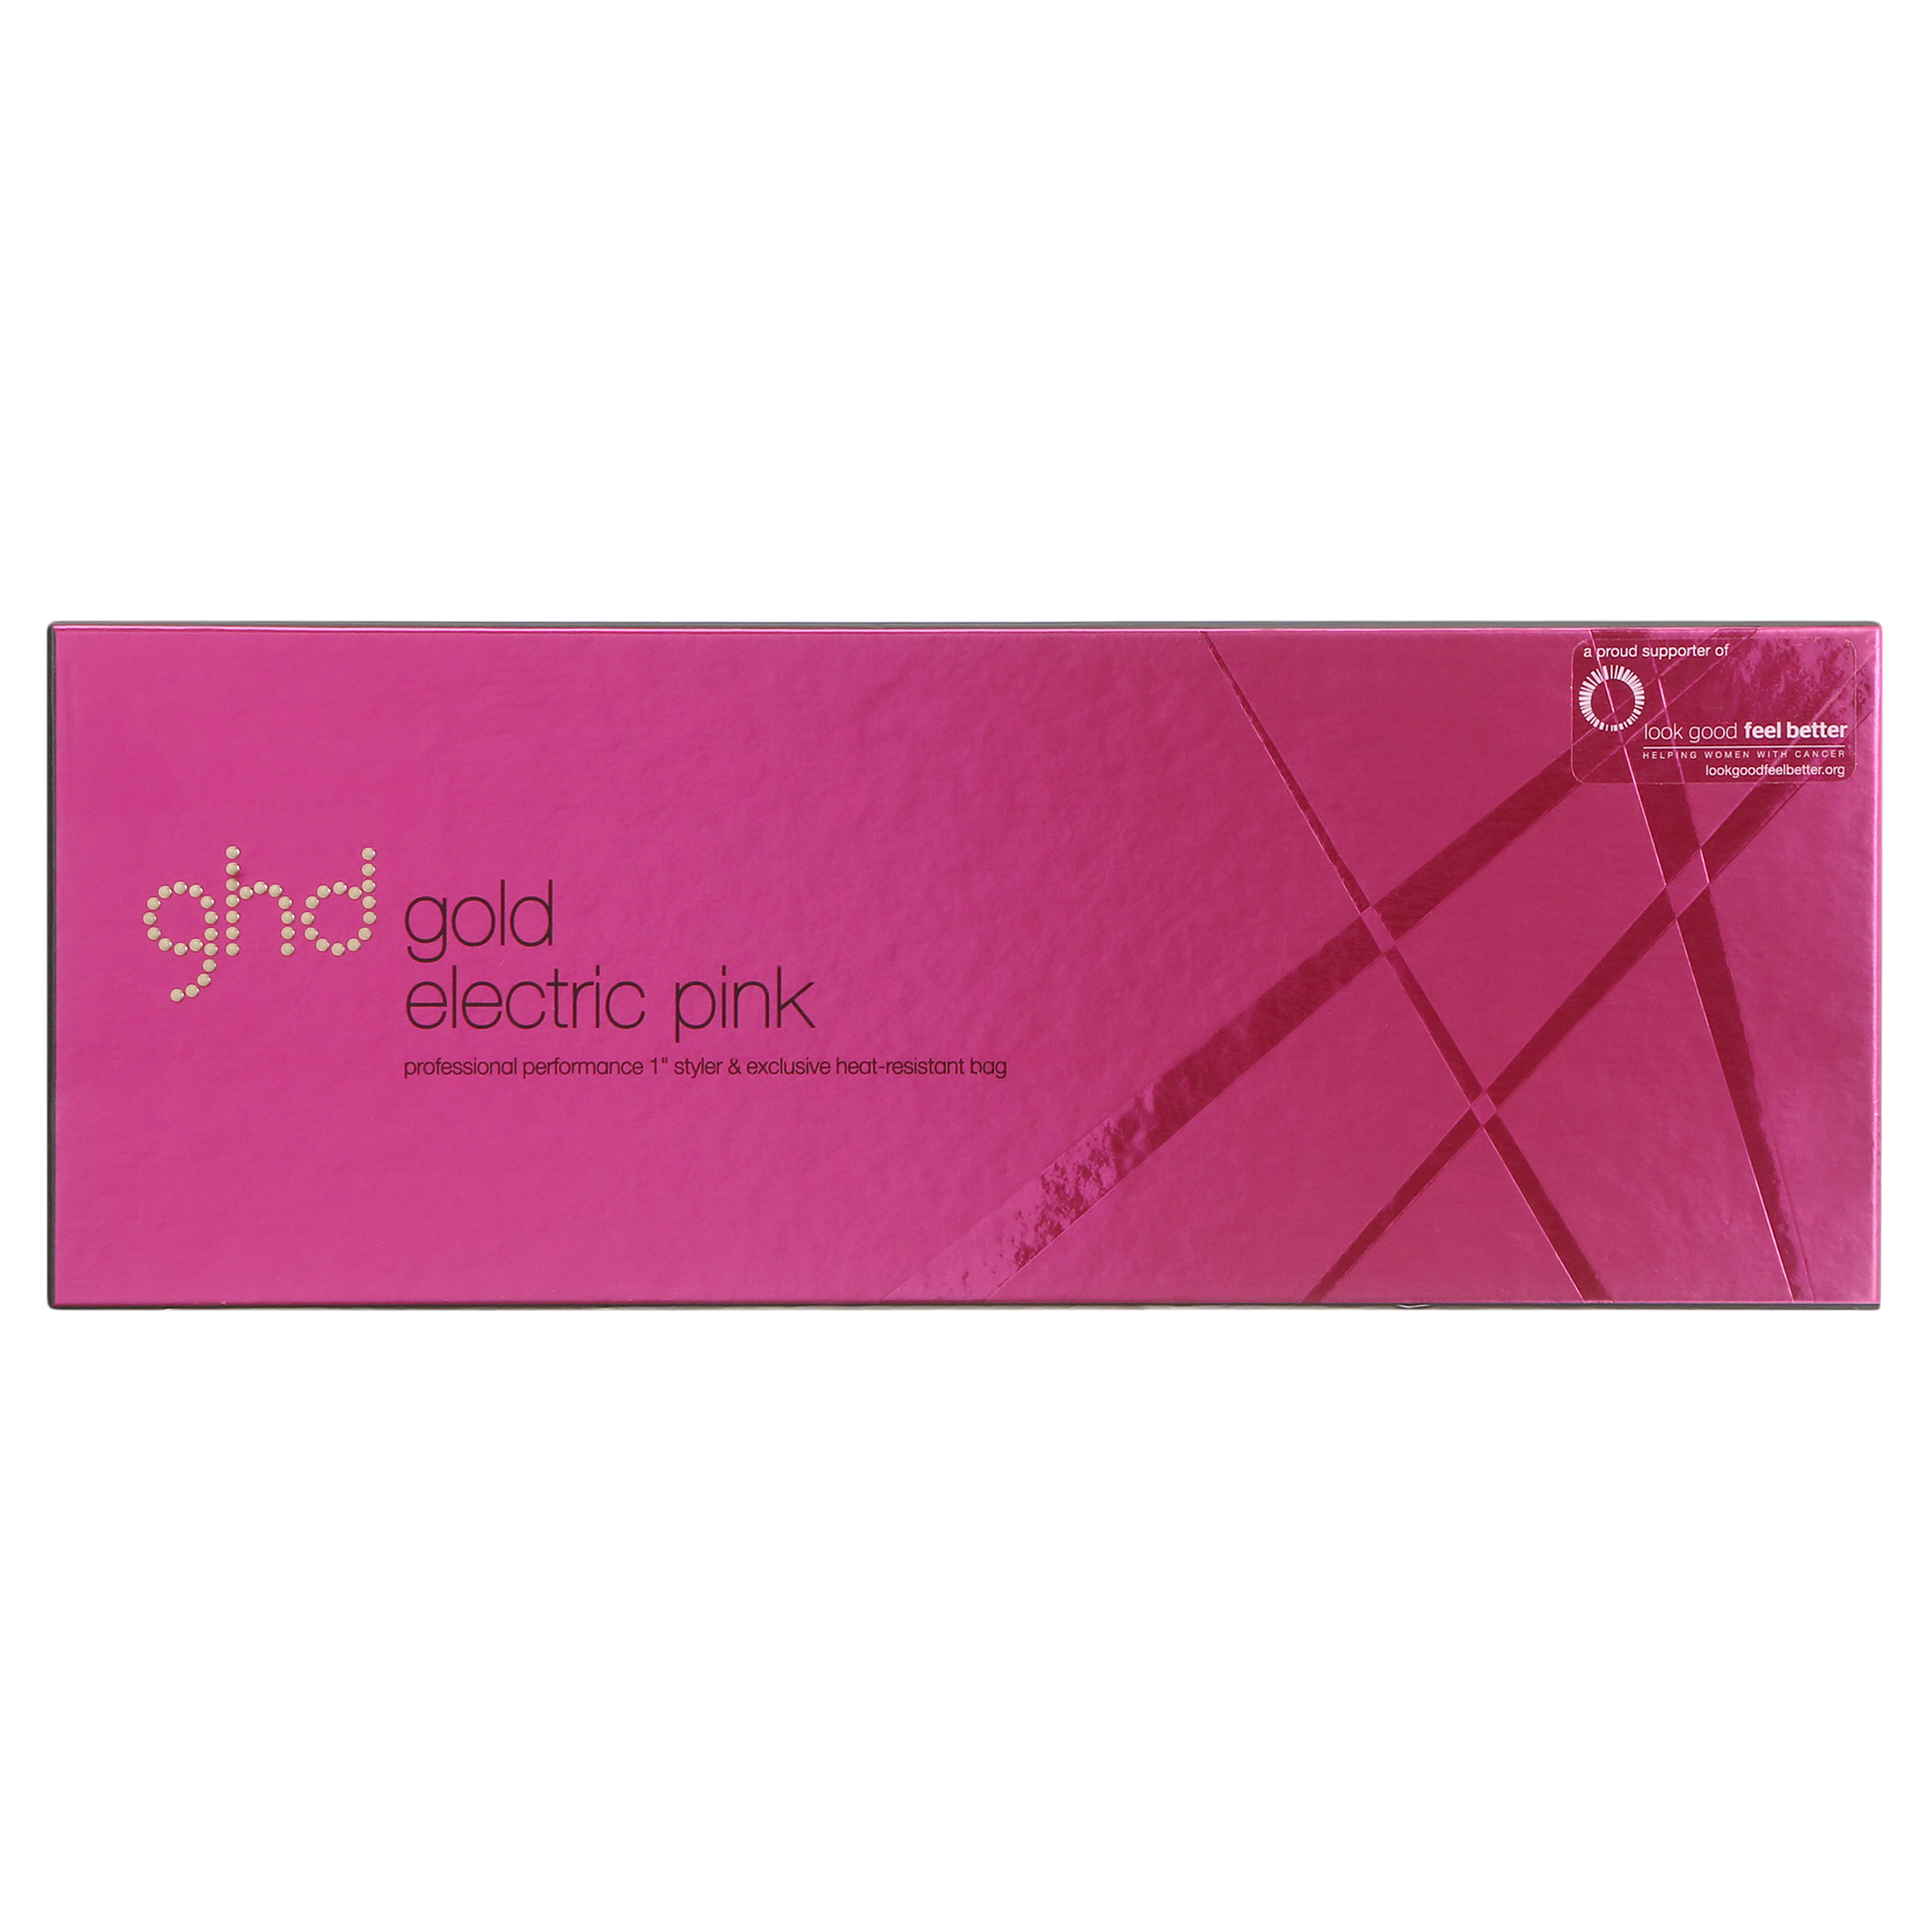 GHD Electric Pink Gold Styler Flat Iron, 1" - image 3 of 10